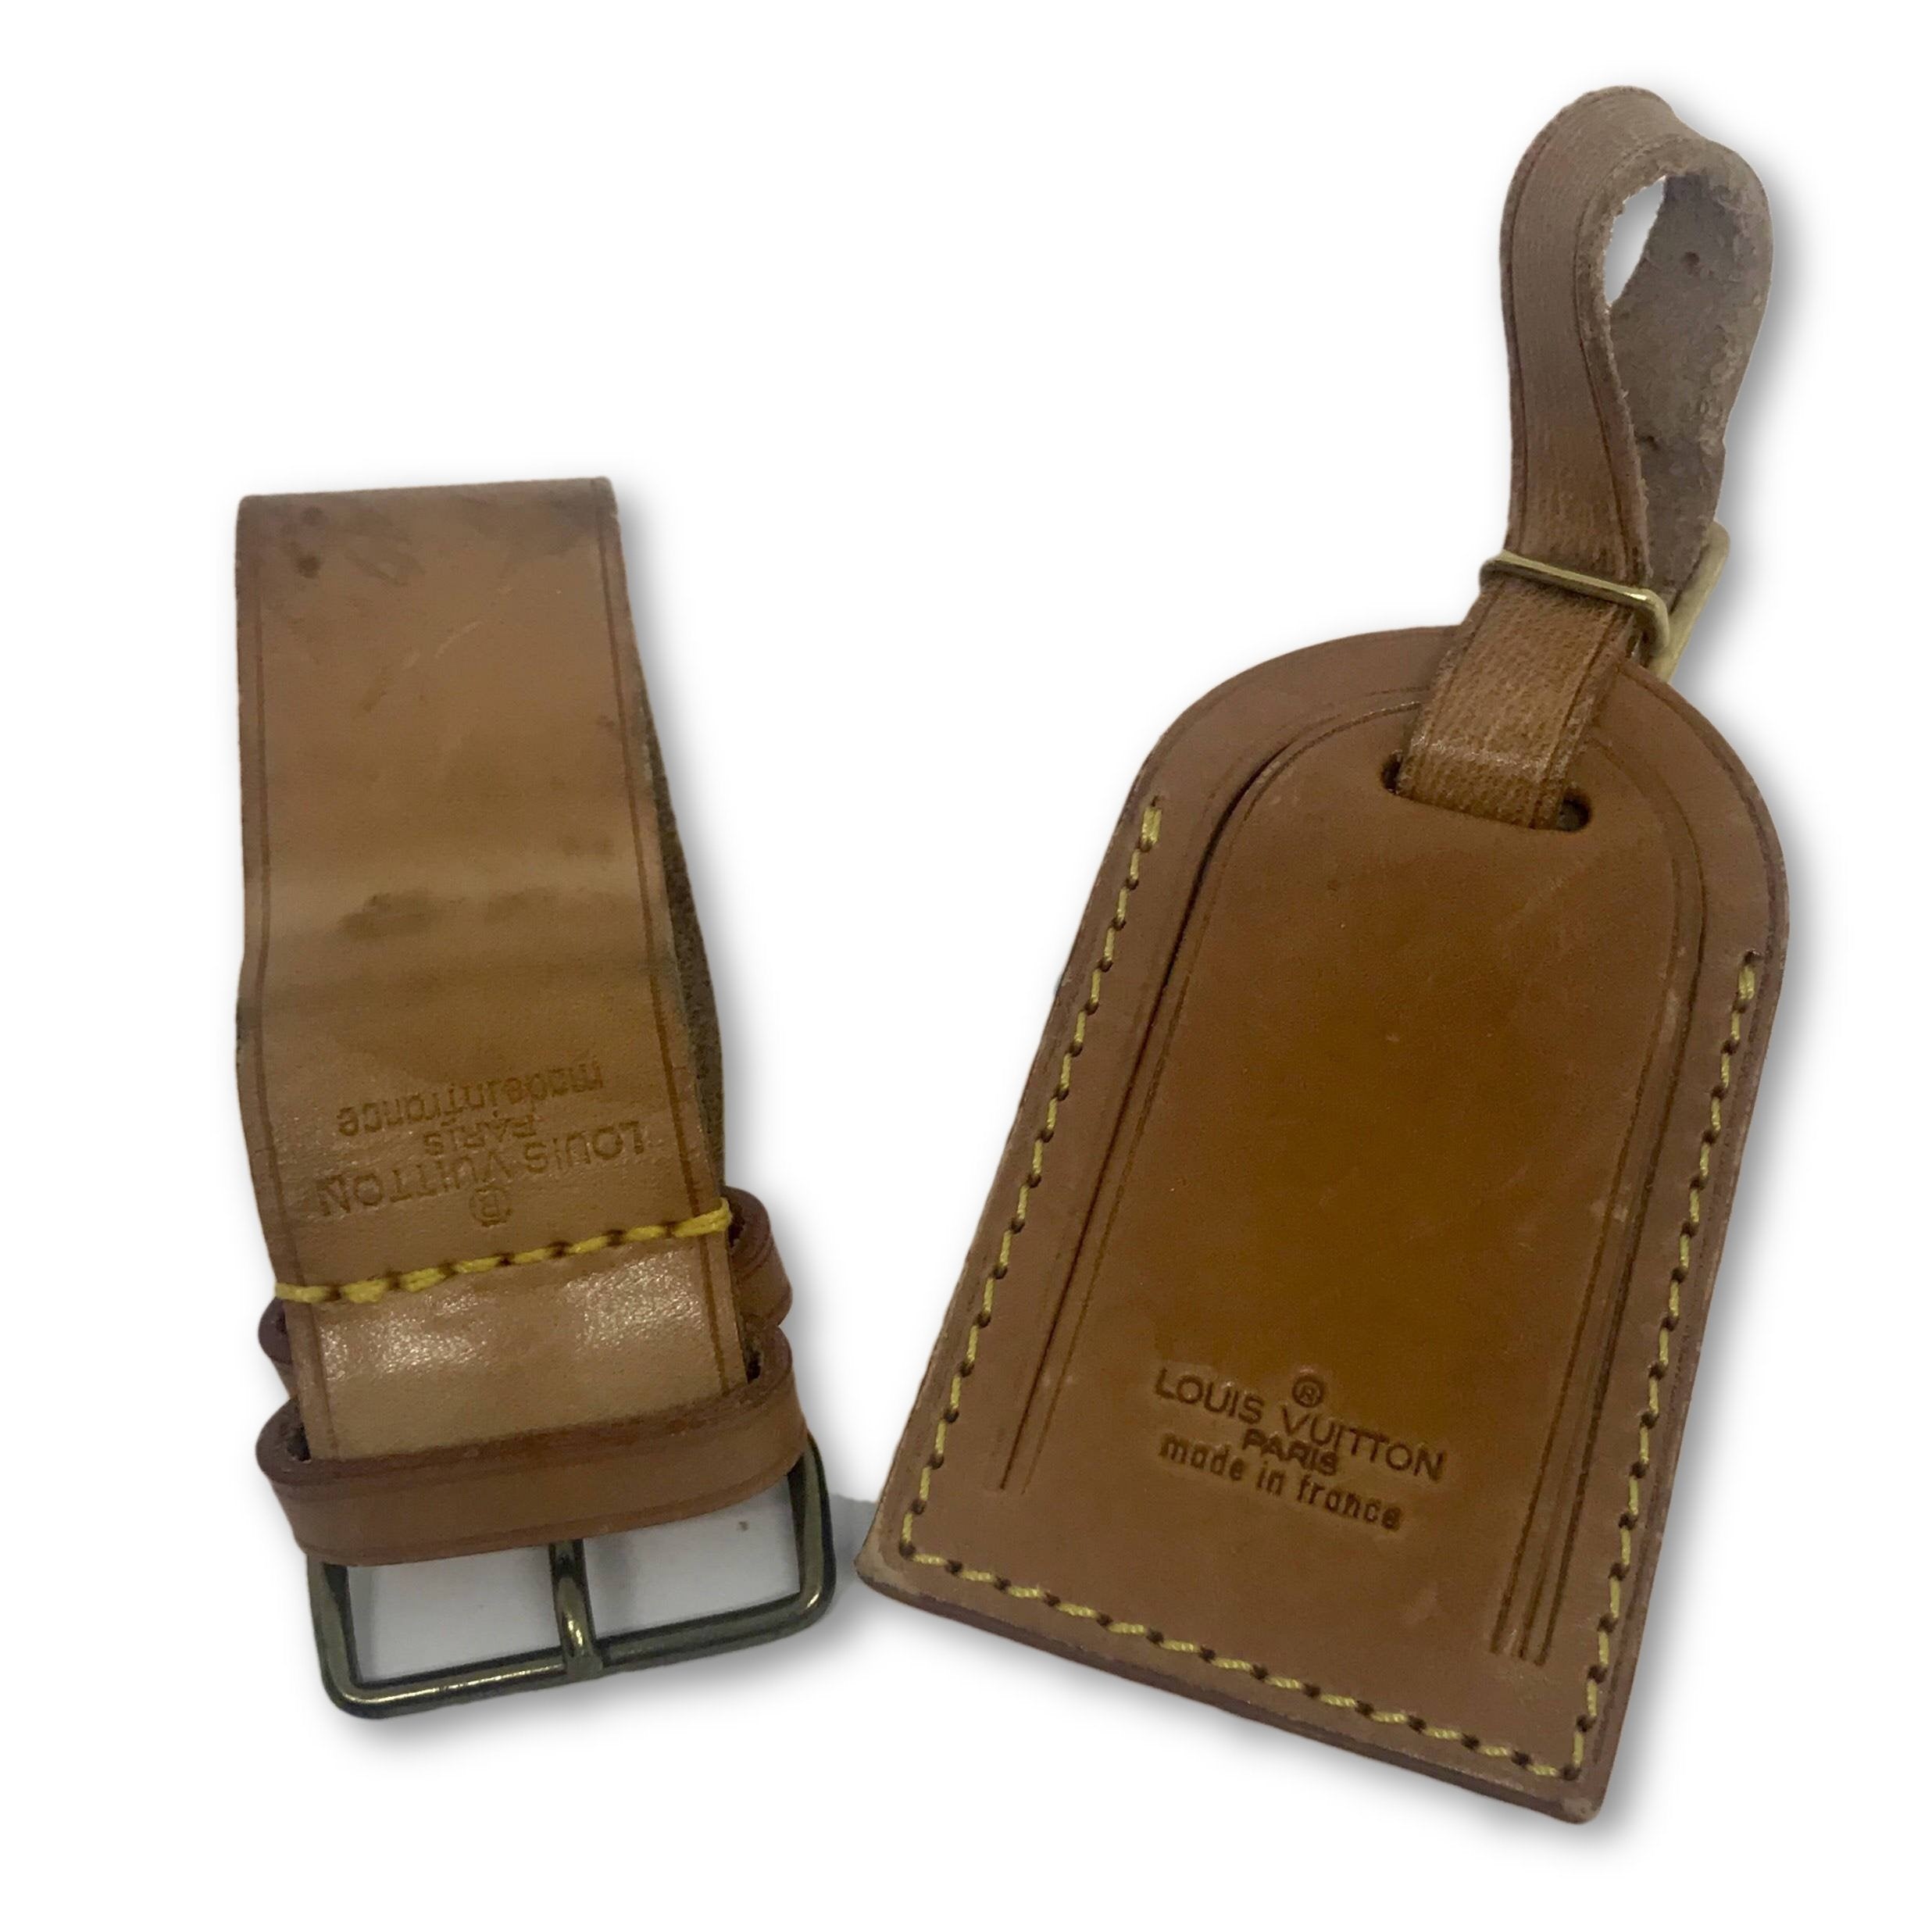 Authentic Louis Vuitton LV Large Stainless Steel Luggage Tag Key